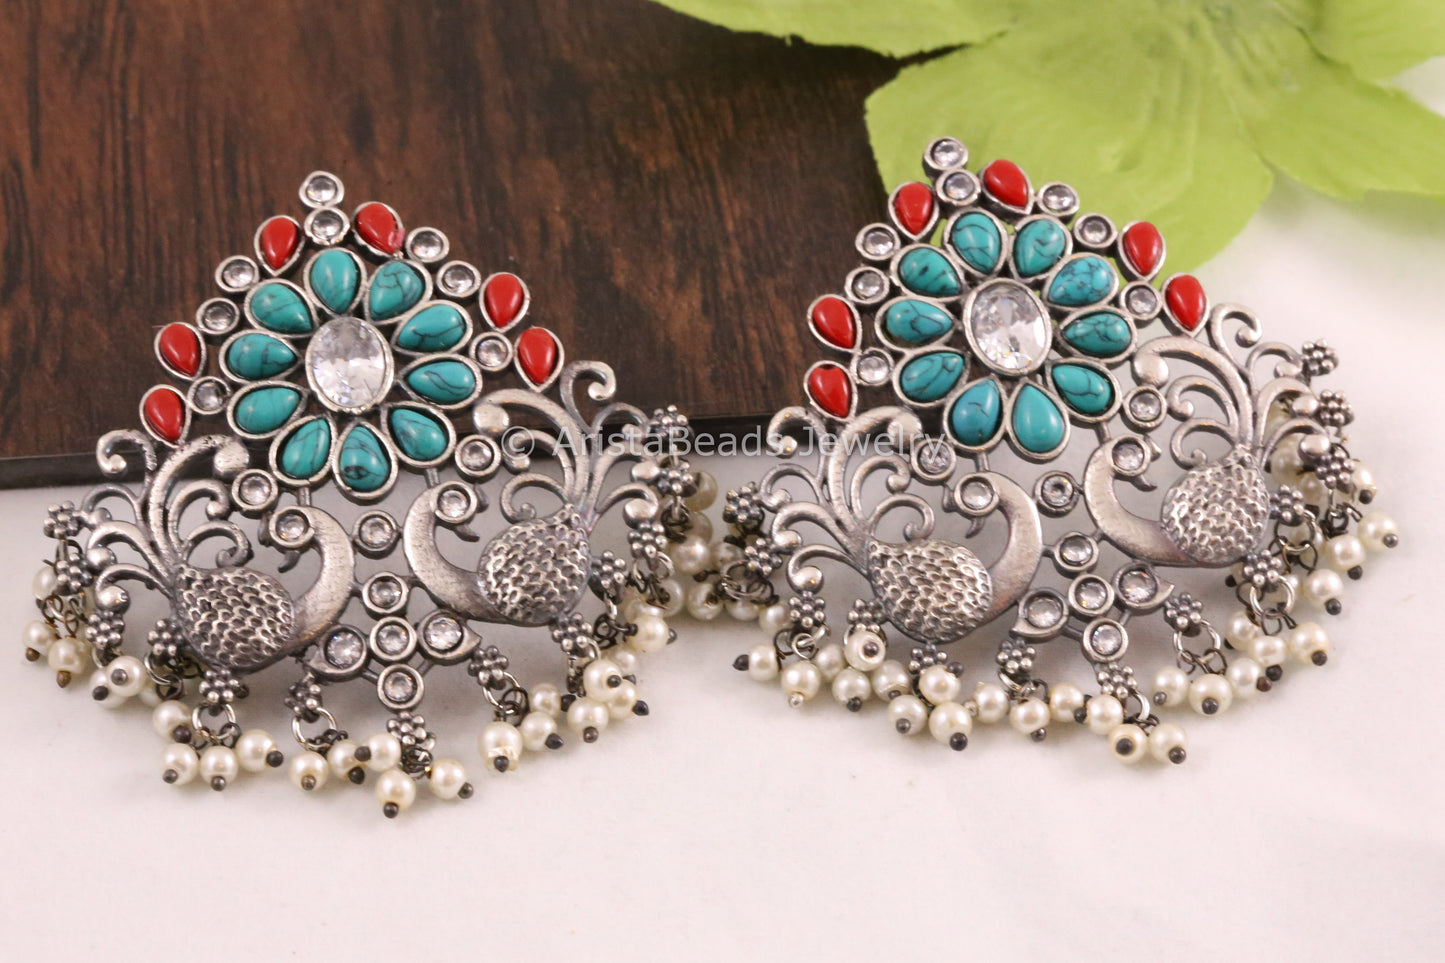 Large Peacock Earrings - Turquoise Coral